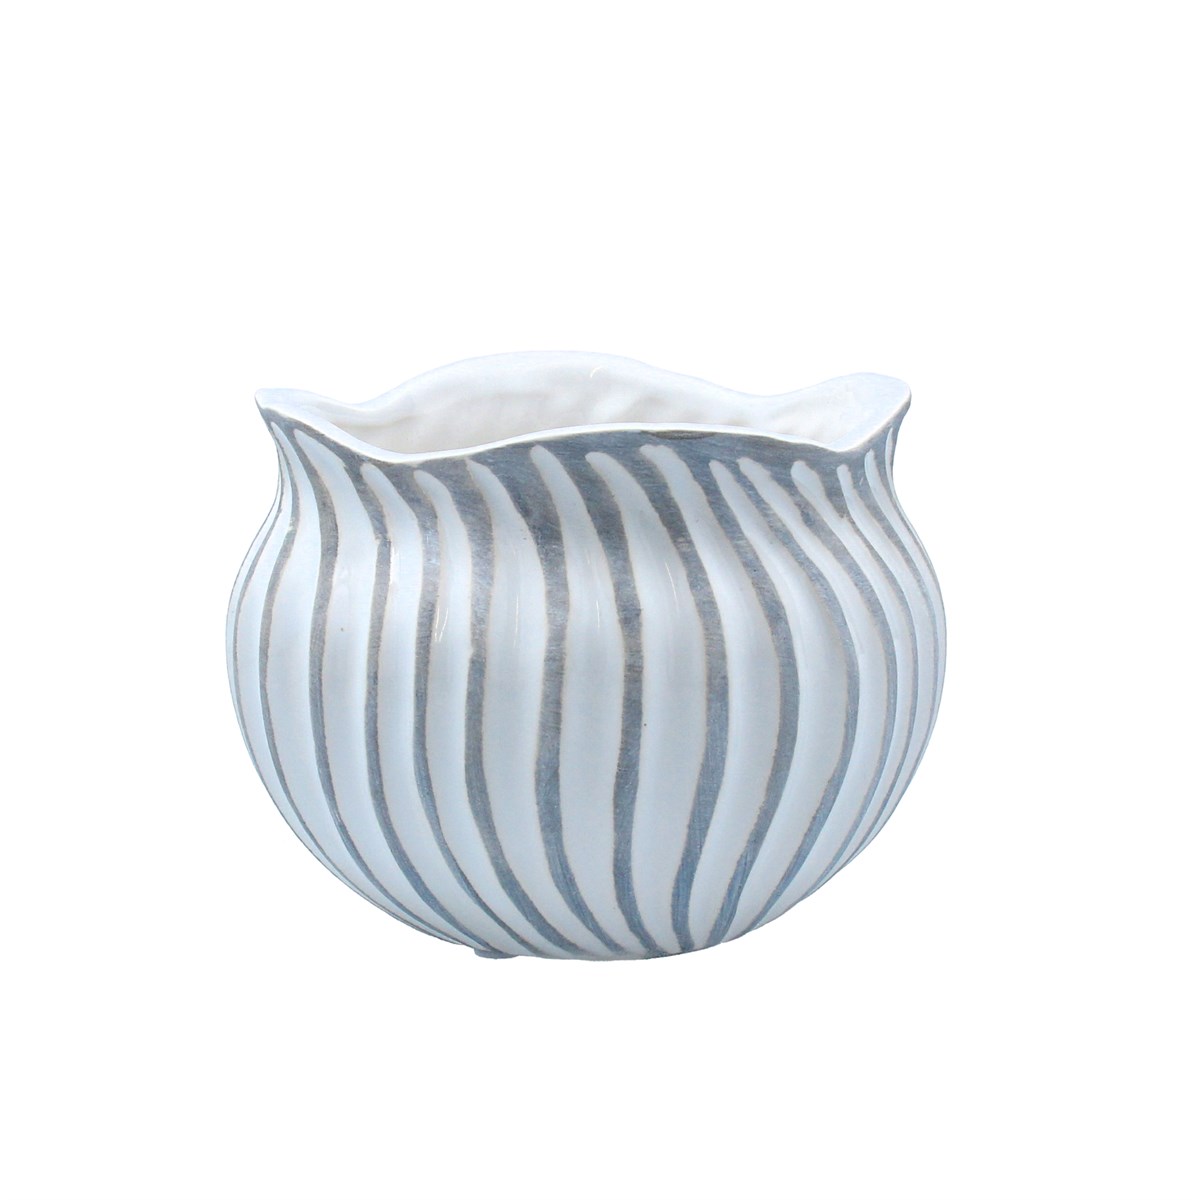 A small white and grey ceramic pot cover with all over wave design. The perfect addition to your home or the perfect gift for yourself or a loved one. By London designer Gisela Graham.